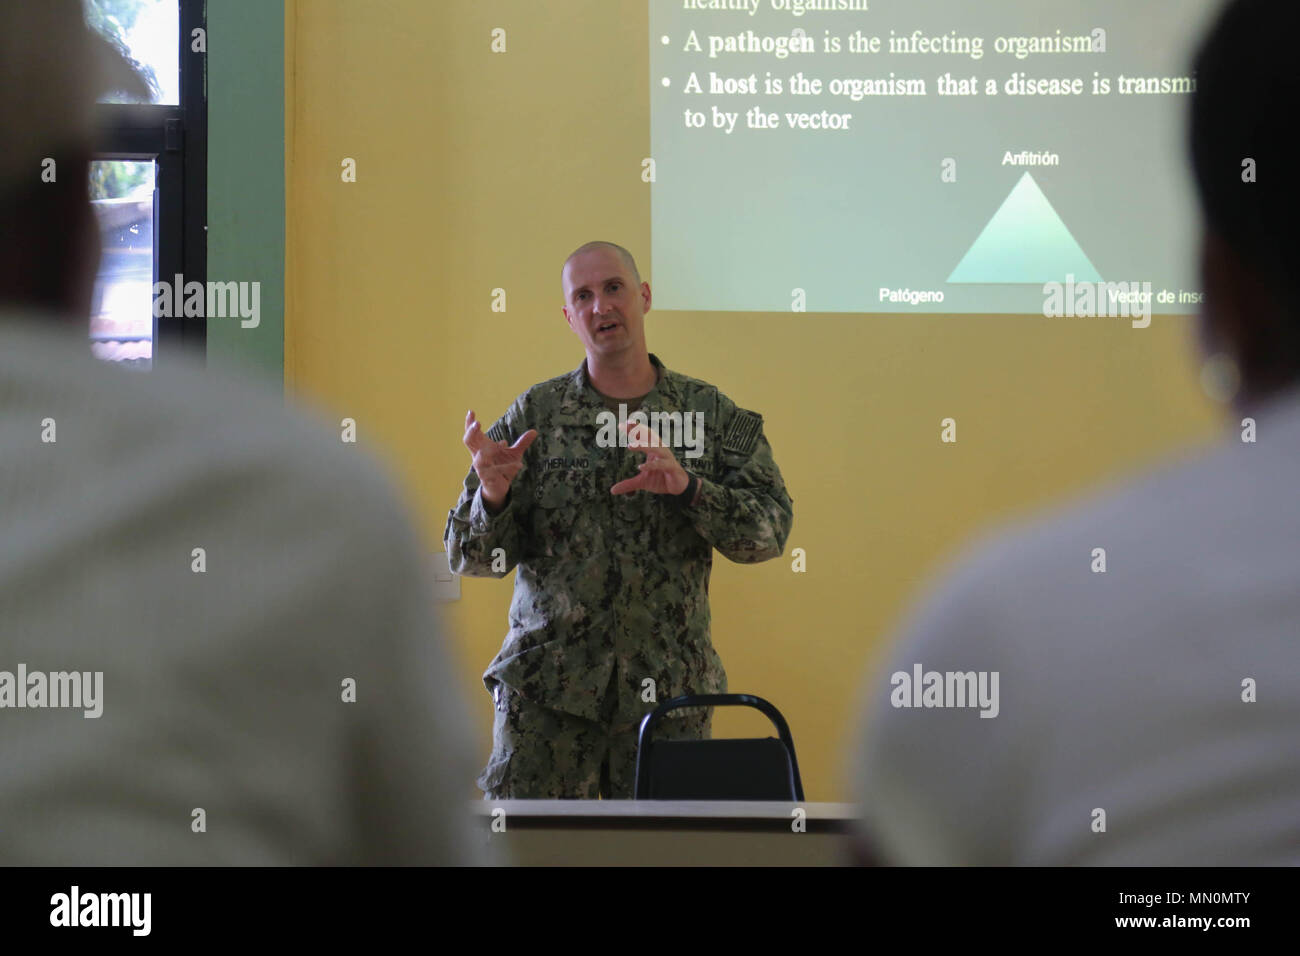 170807-A-QE286-0026 TRUJILLO, Honduras (Aug. 7, 2017) U.S. Navy Lt. Cmdr. Ian Sutherland, technical director for the Navy Entomology Center of Excellence, gives a entomology presentation at a local medical center, during a subject matter expert exchange, as part of Southern Partnership Station 17. SPS-EPF 17 is a U.S. Navy deployment, executed by U.S. Naval Forces Southern Command/U.S. 4th Fleet, focused on subject matter expert exchanges with partner nation militaries and security forces in Central and South America. (U.S. Army photo by SPC Judge Jones/Released) Stock Photo